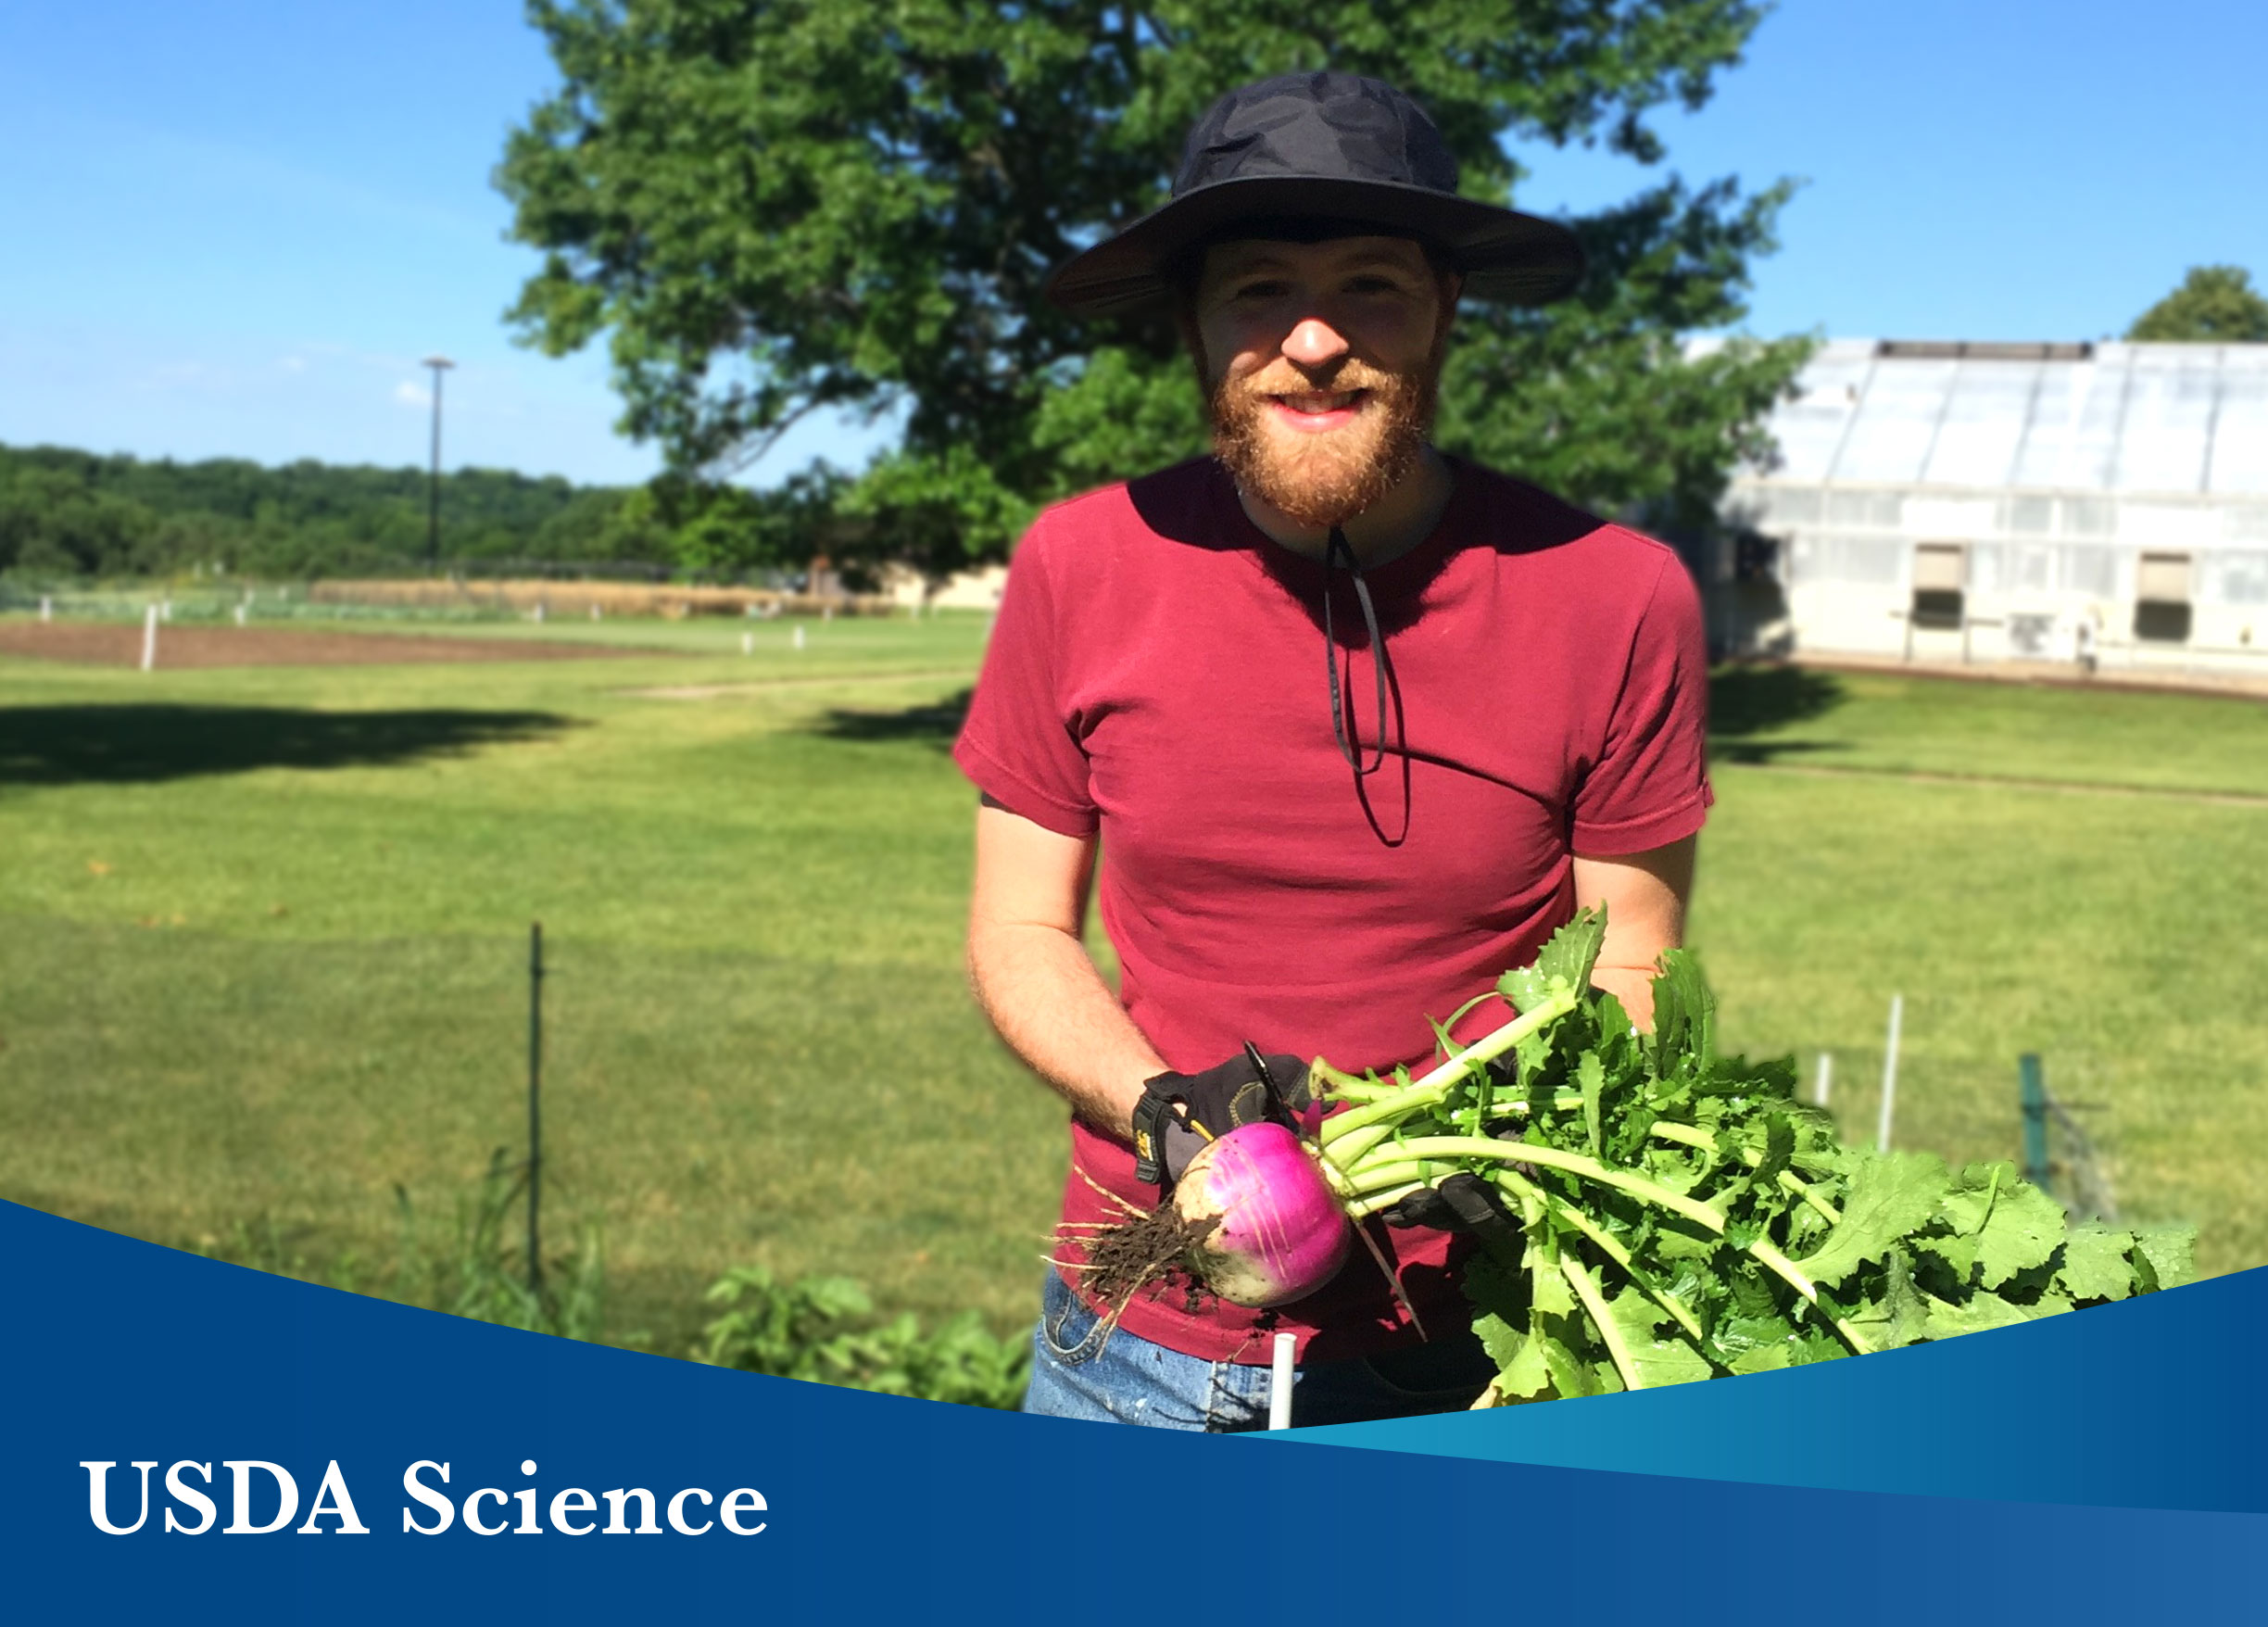 ARS biological science technician Ethan Roberts inspects a radish harvested from a “People’s Garden” plot